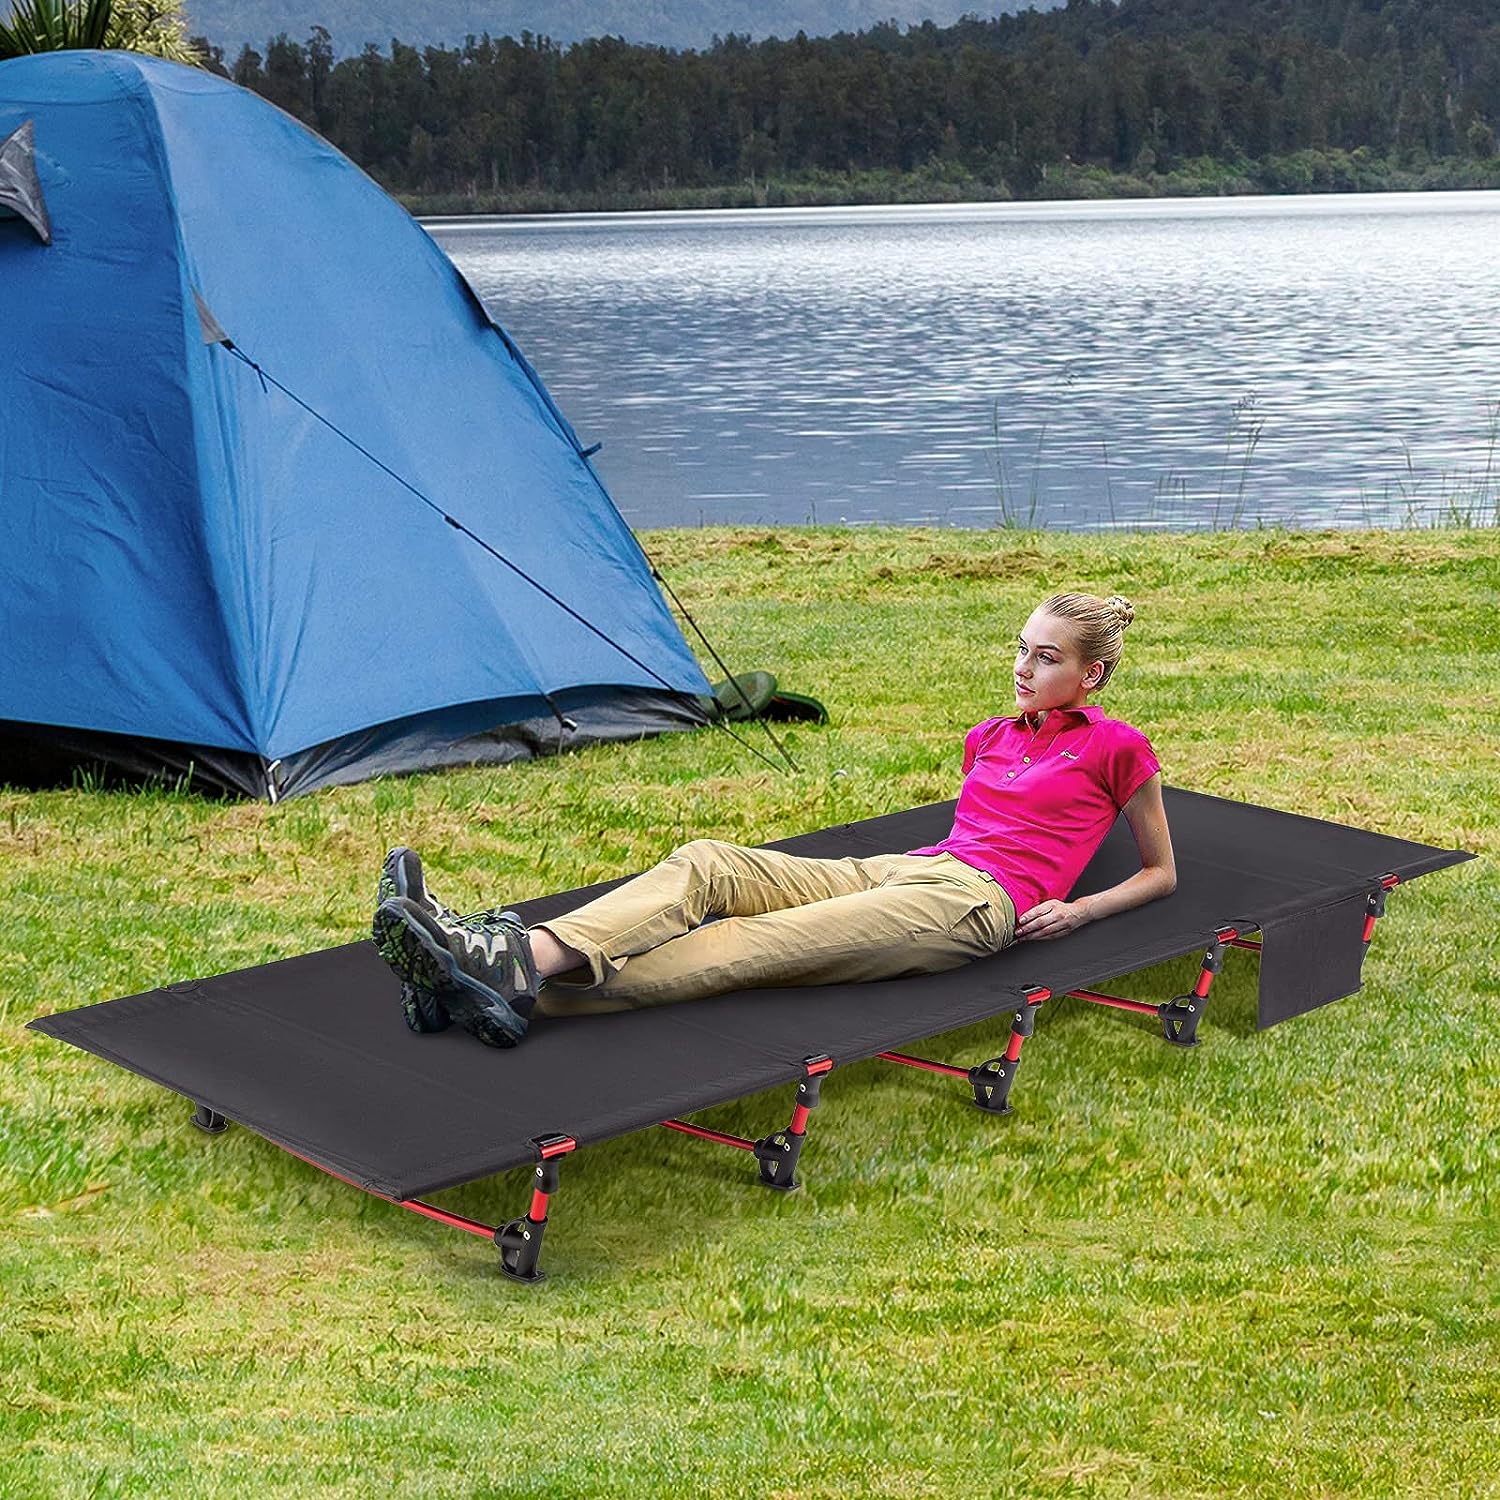 Leogreen-Foldable-Camp-Bed-Ultra-Lightweight-Compact-Strong-and-Durable-192-x-70-x-17cm-for-Tents-Outdoor-Hiking-Traveling-Maximum-Load-150kg-Black